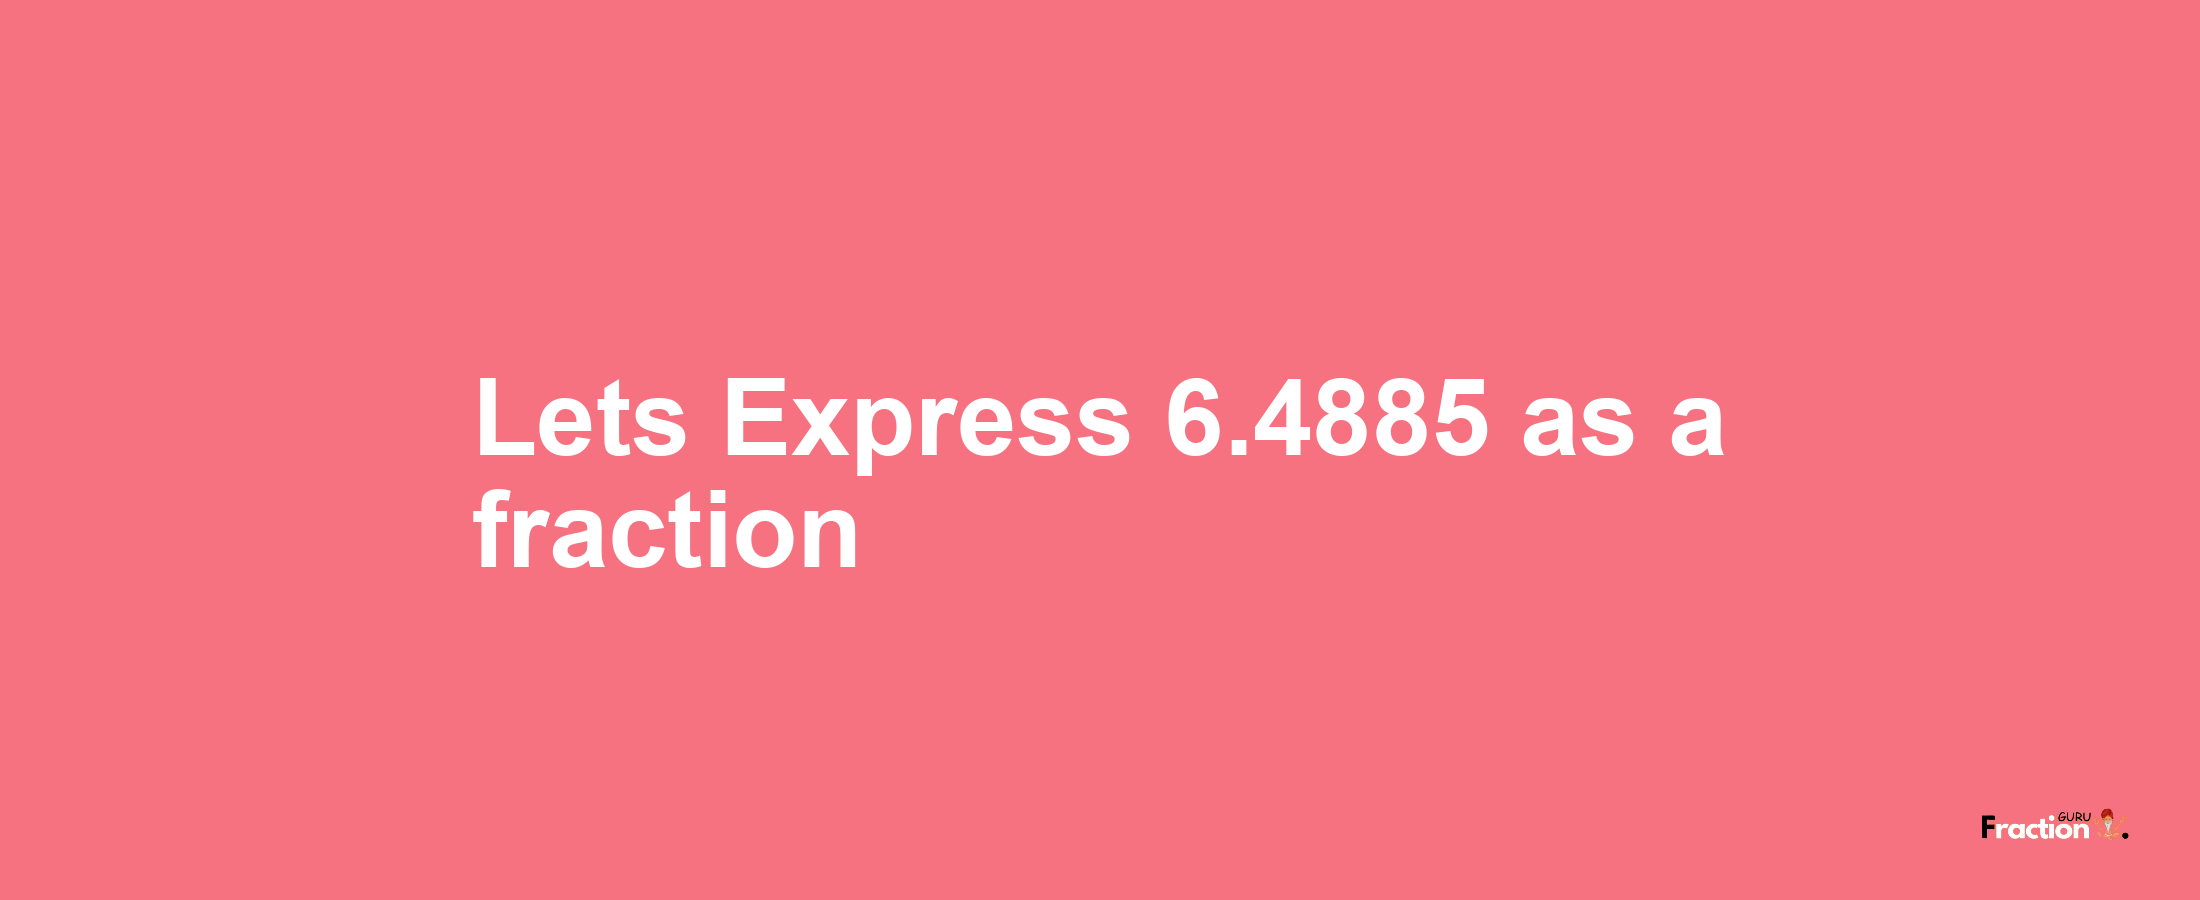 Lets Express 6.4885 as afraction